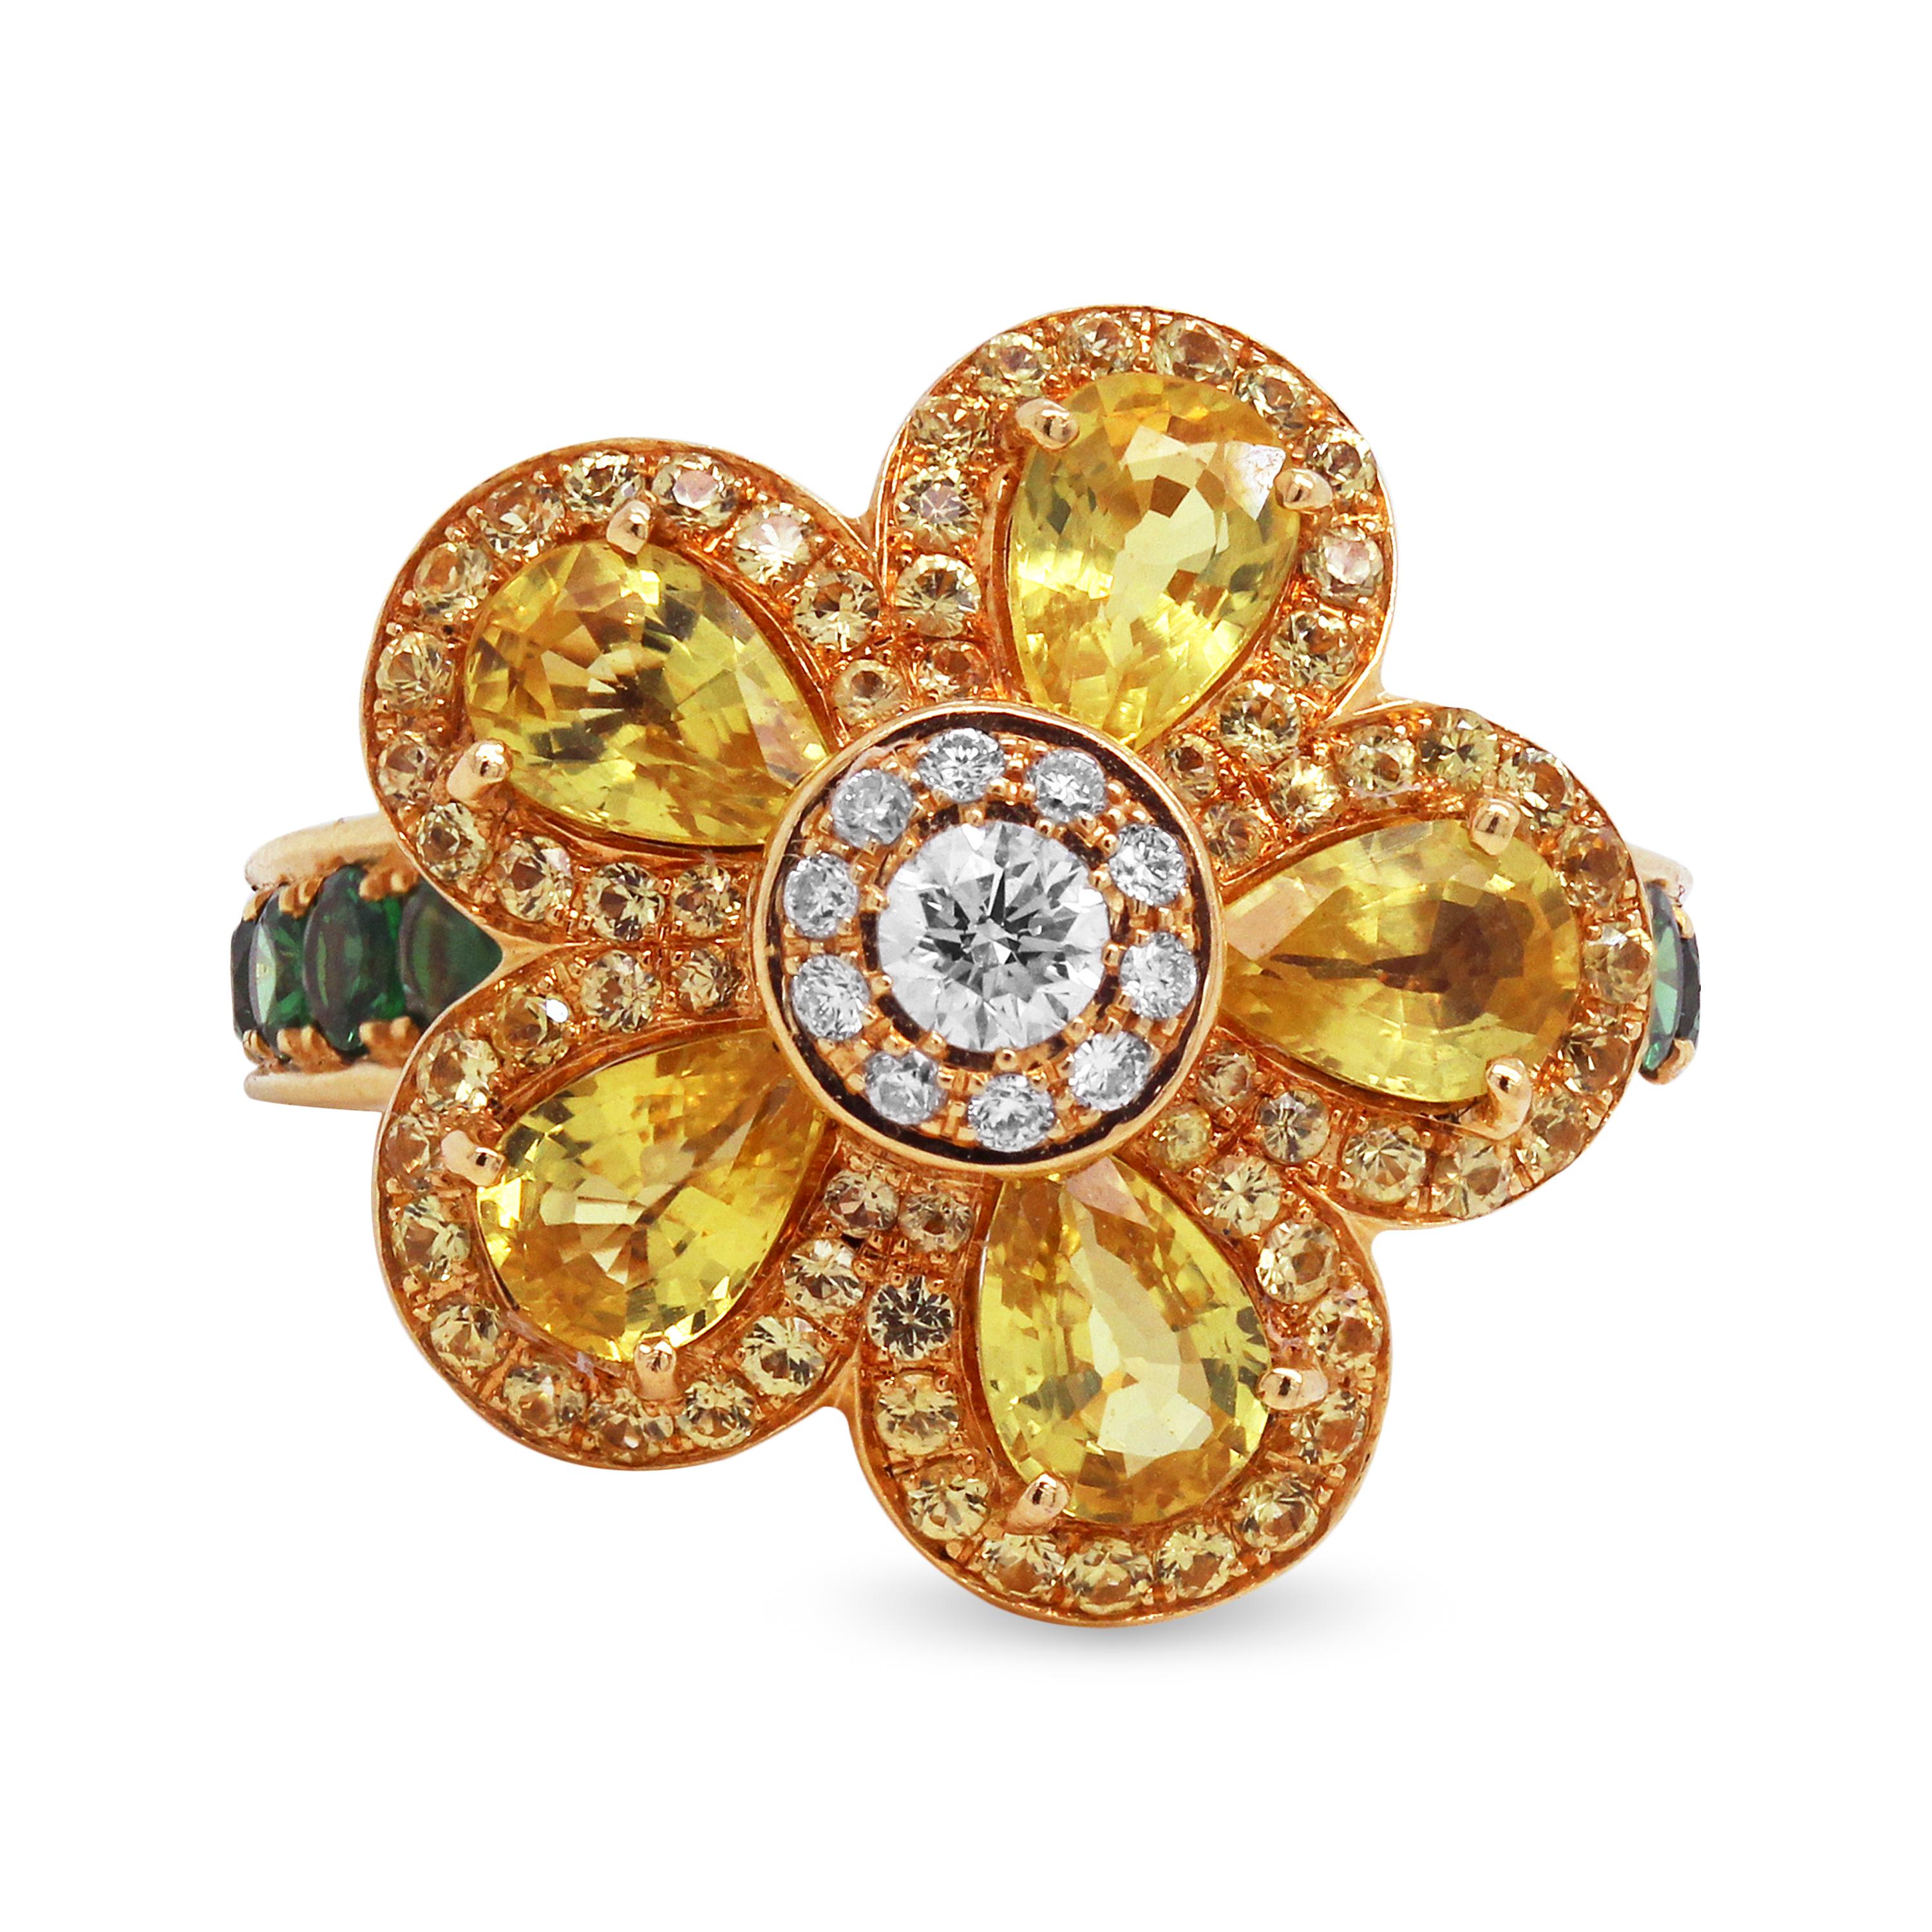 Cellini Yellow Sapphire Tsavorite 18K Yellow Gold Diamond Floral Cocktail Ring

A unique flower sits on this ring set with pearshape and round yellow sapphires and a diamond center. Tsavorite are set half way across the band which creates a